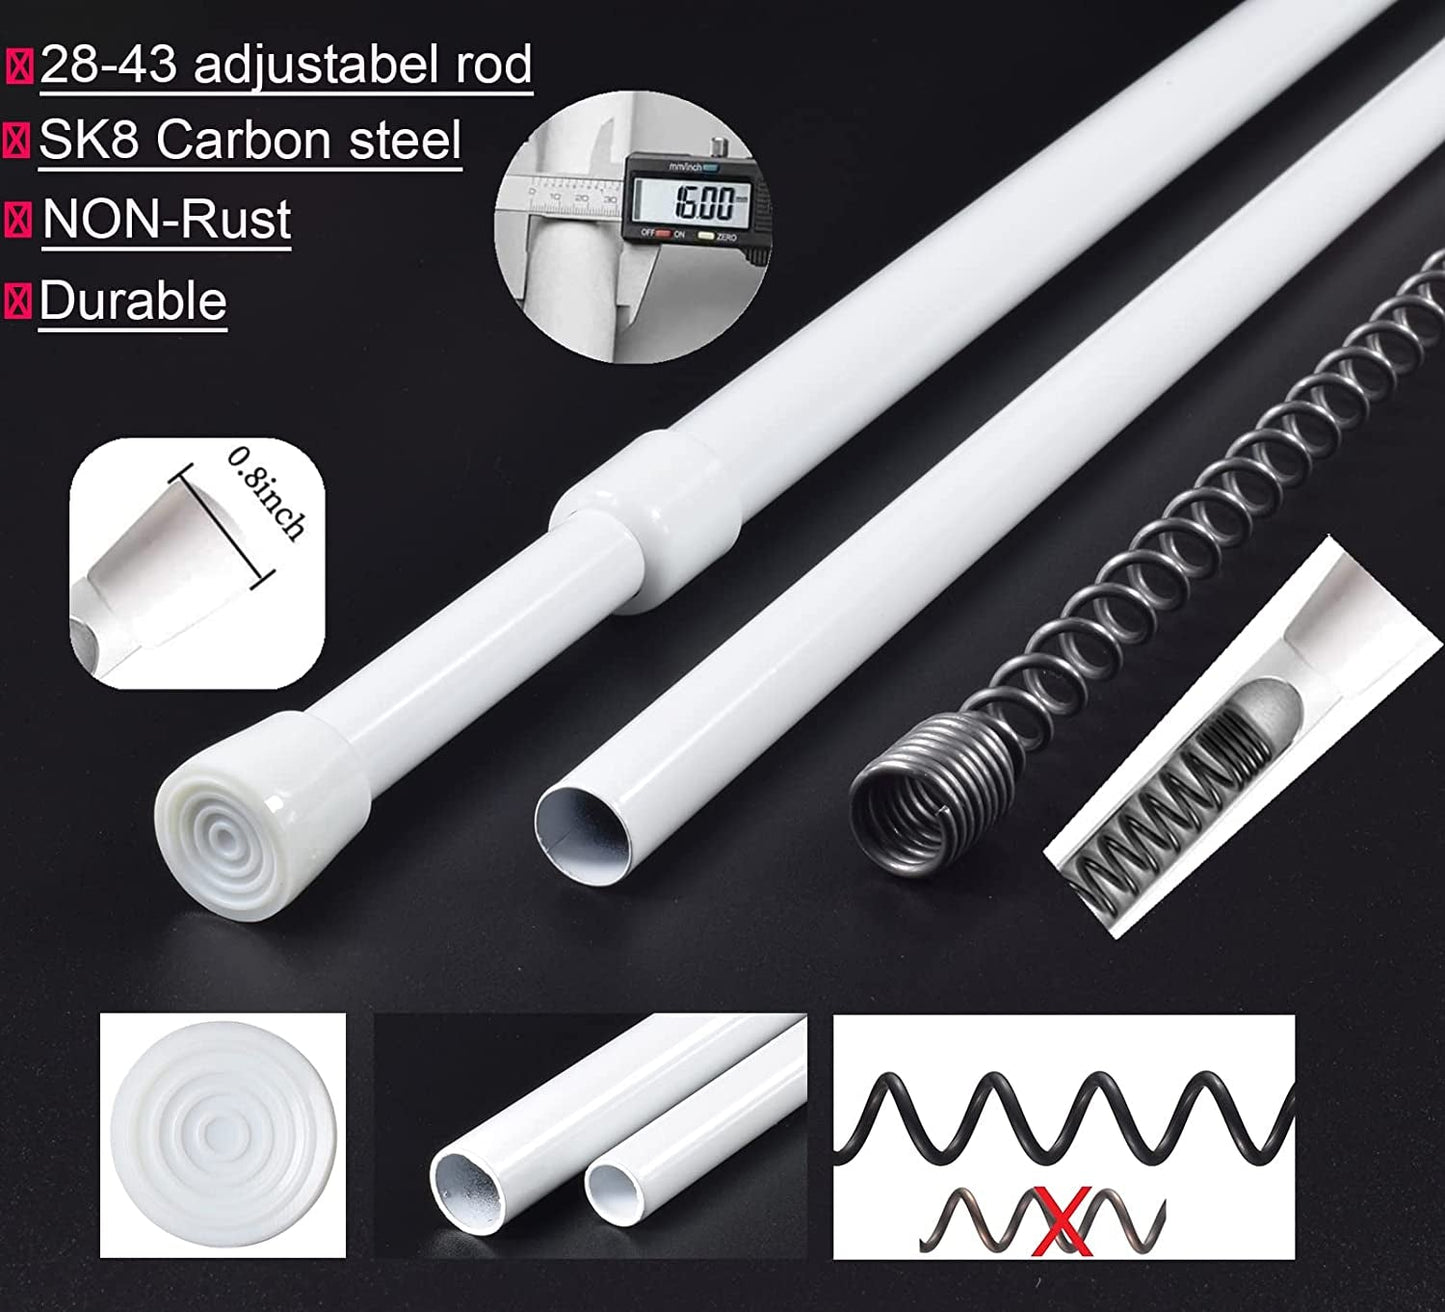 2PCS Spring Tension Curtain Rods 28-43 Inches Adjustable, Small Short Expandable Spring Loaded Curtain Tension Rods, for Window, Bathroom, Cupboard,Kitchen(No Drilling,No Screws,White)